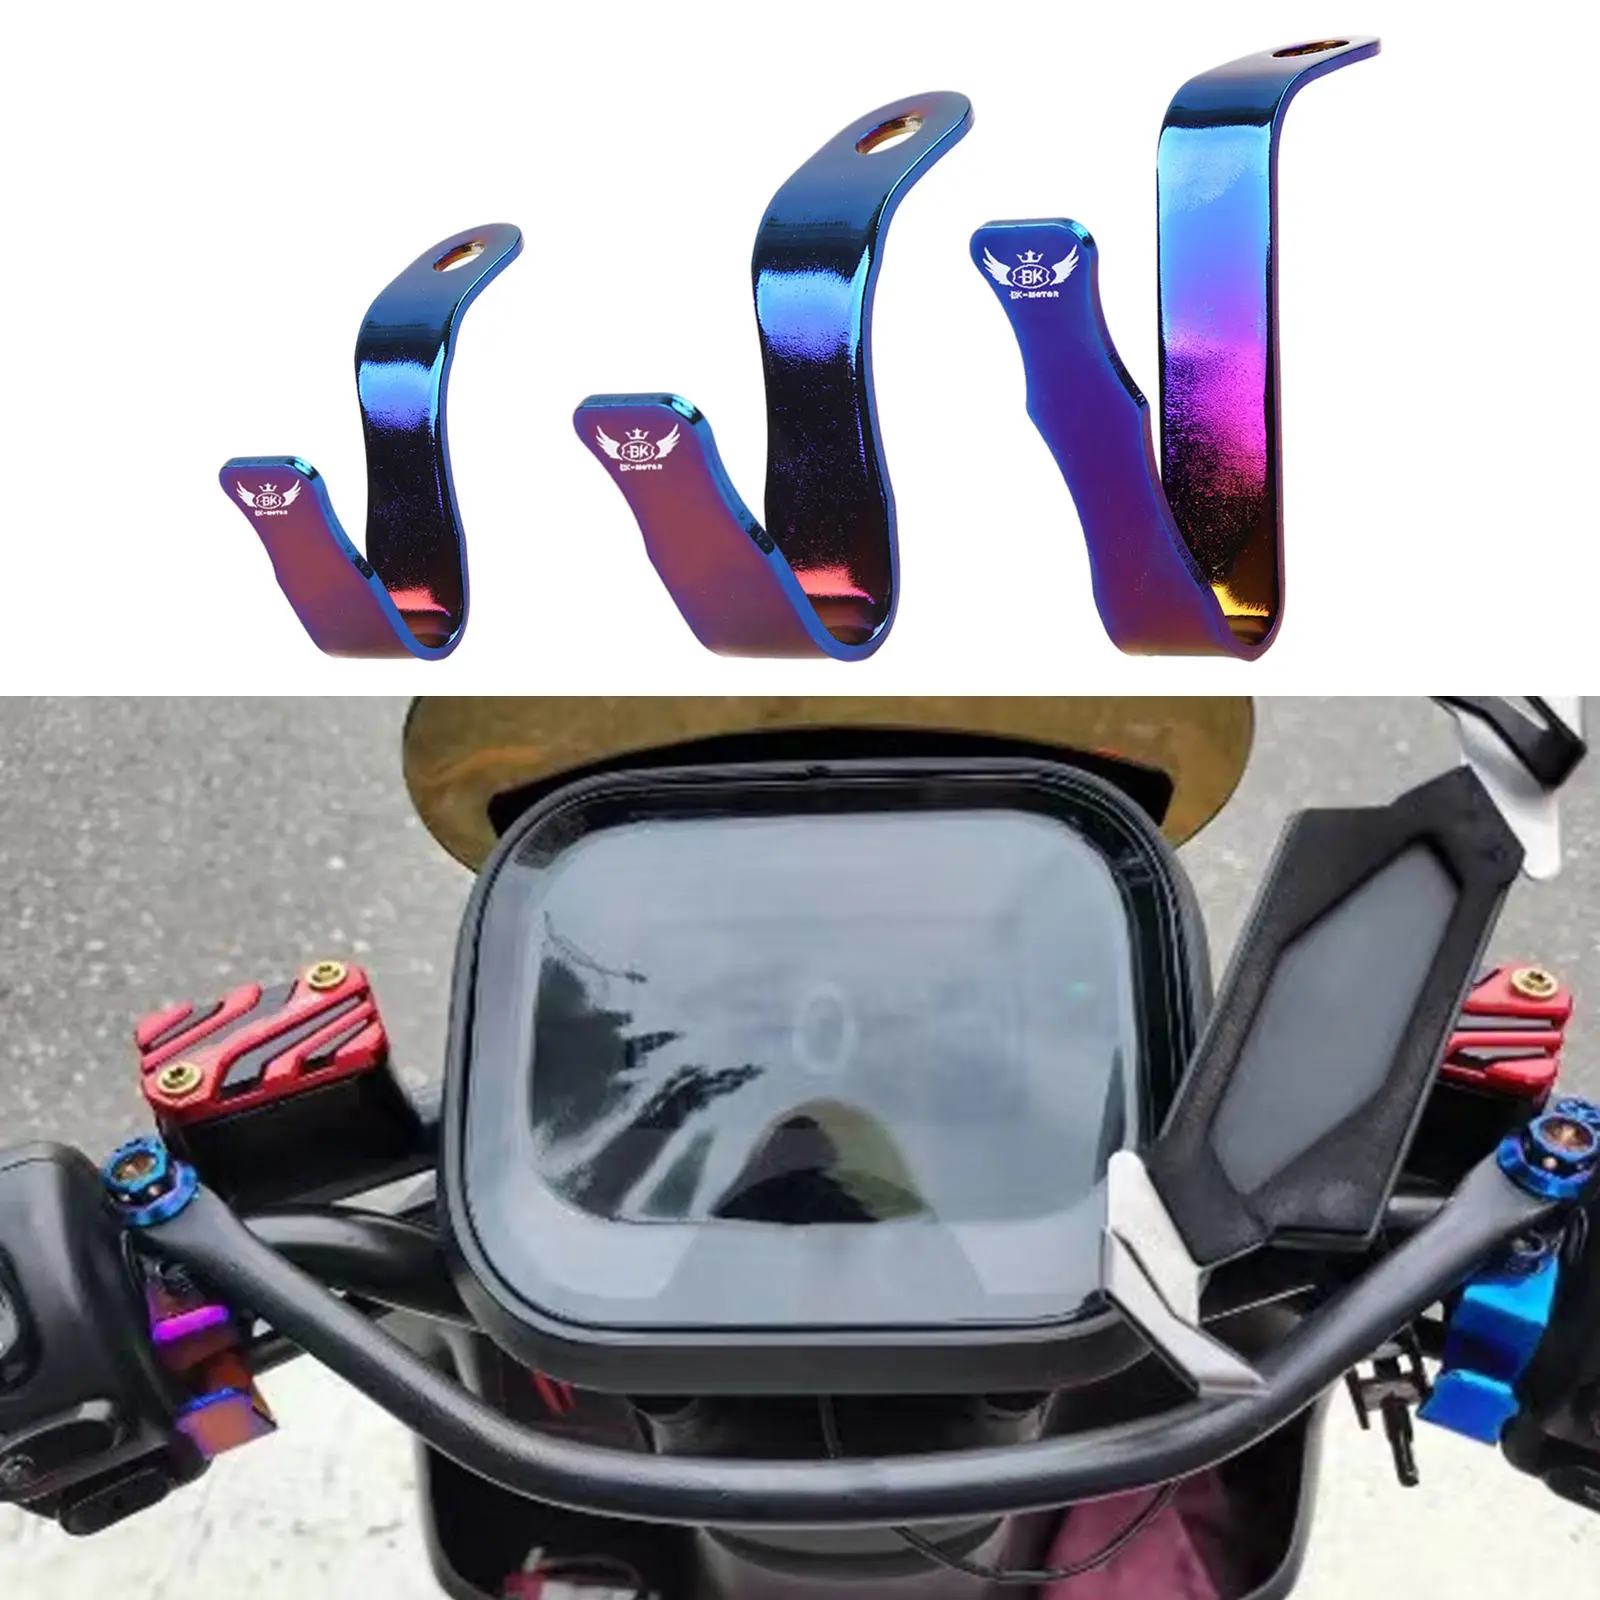 Motorcycle Helmet Rack Protective Gear Titanium Alloy Colorful Motorbike Accessories convenient Hook Holder for Bag Hat